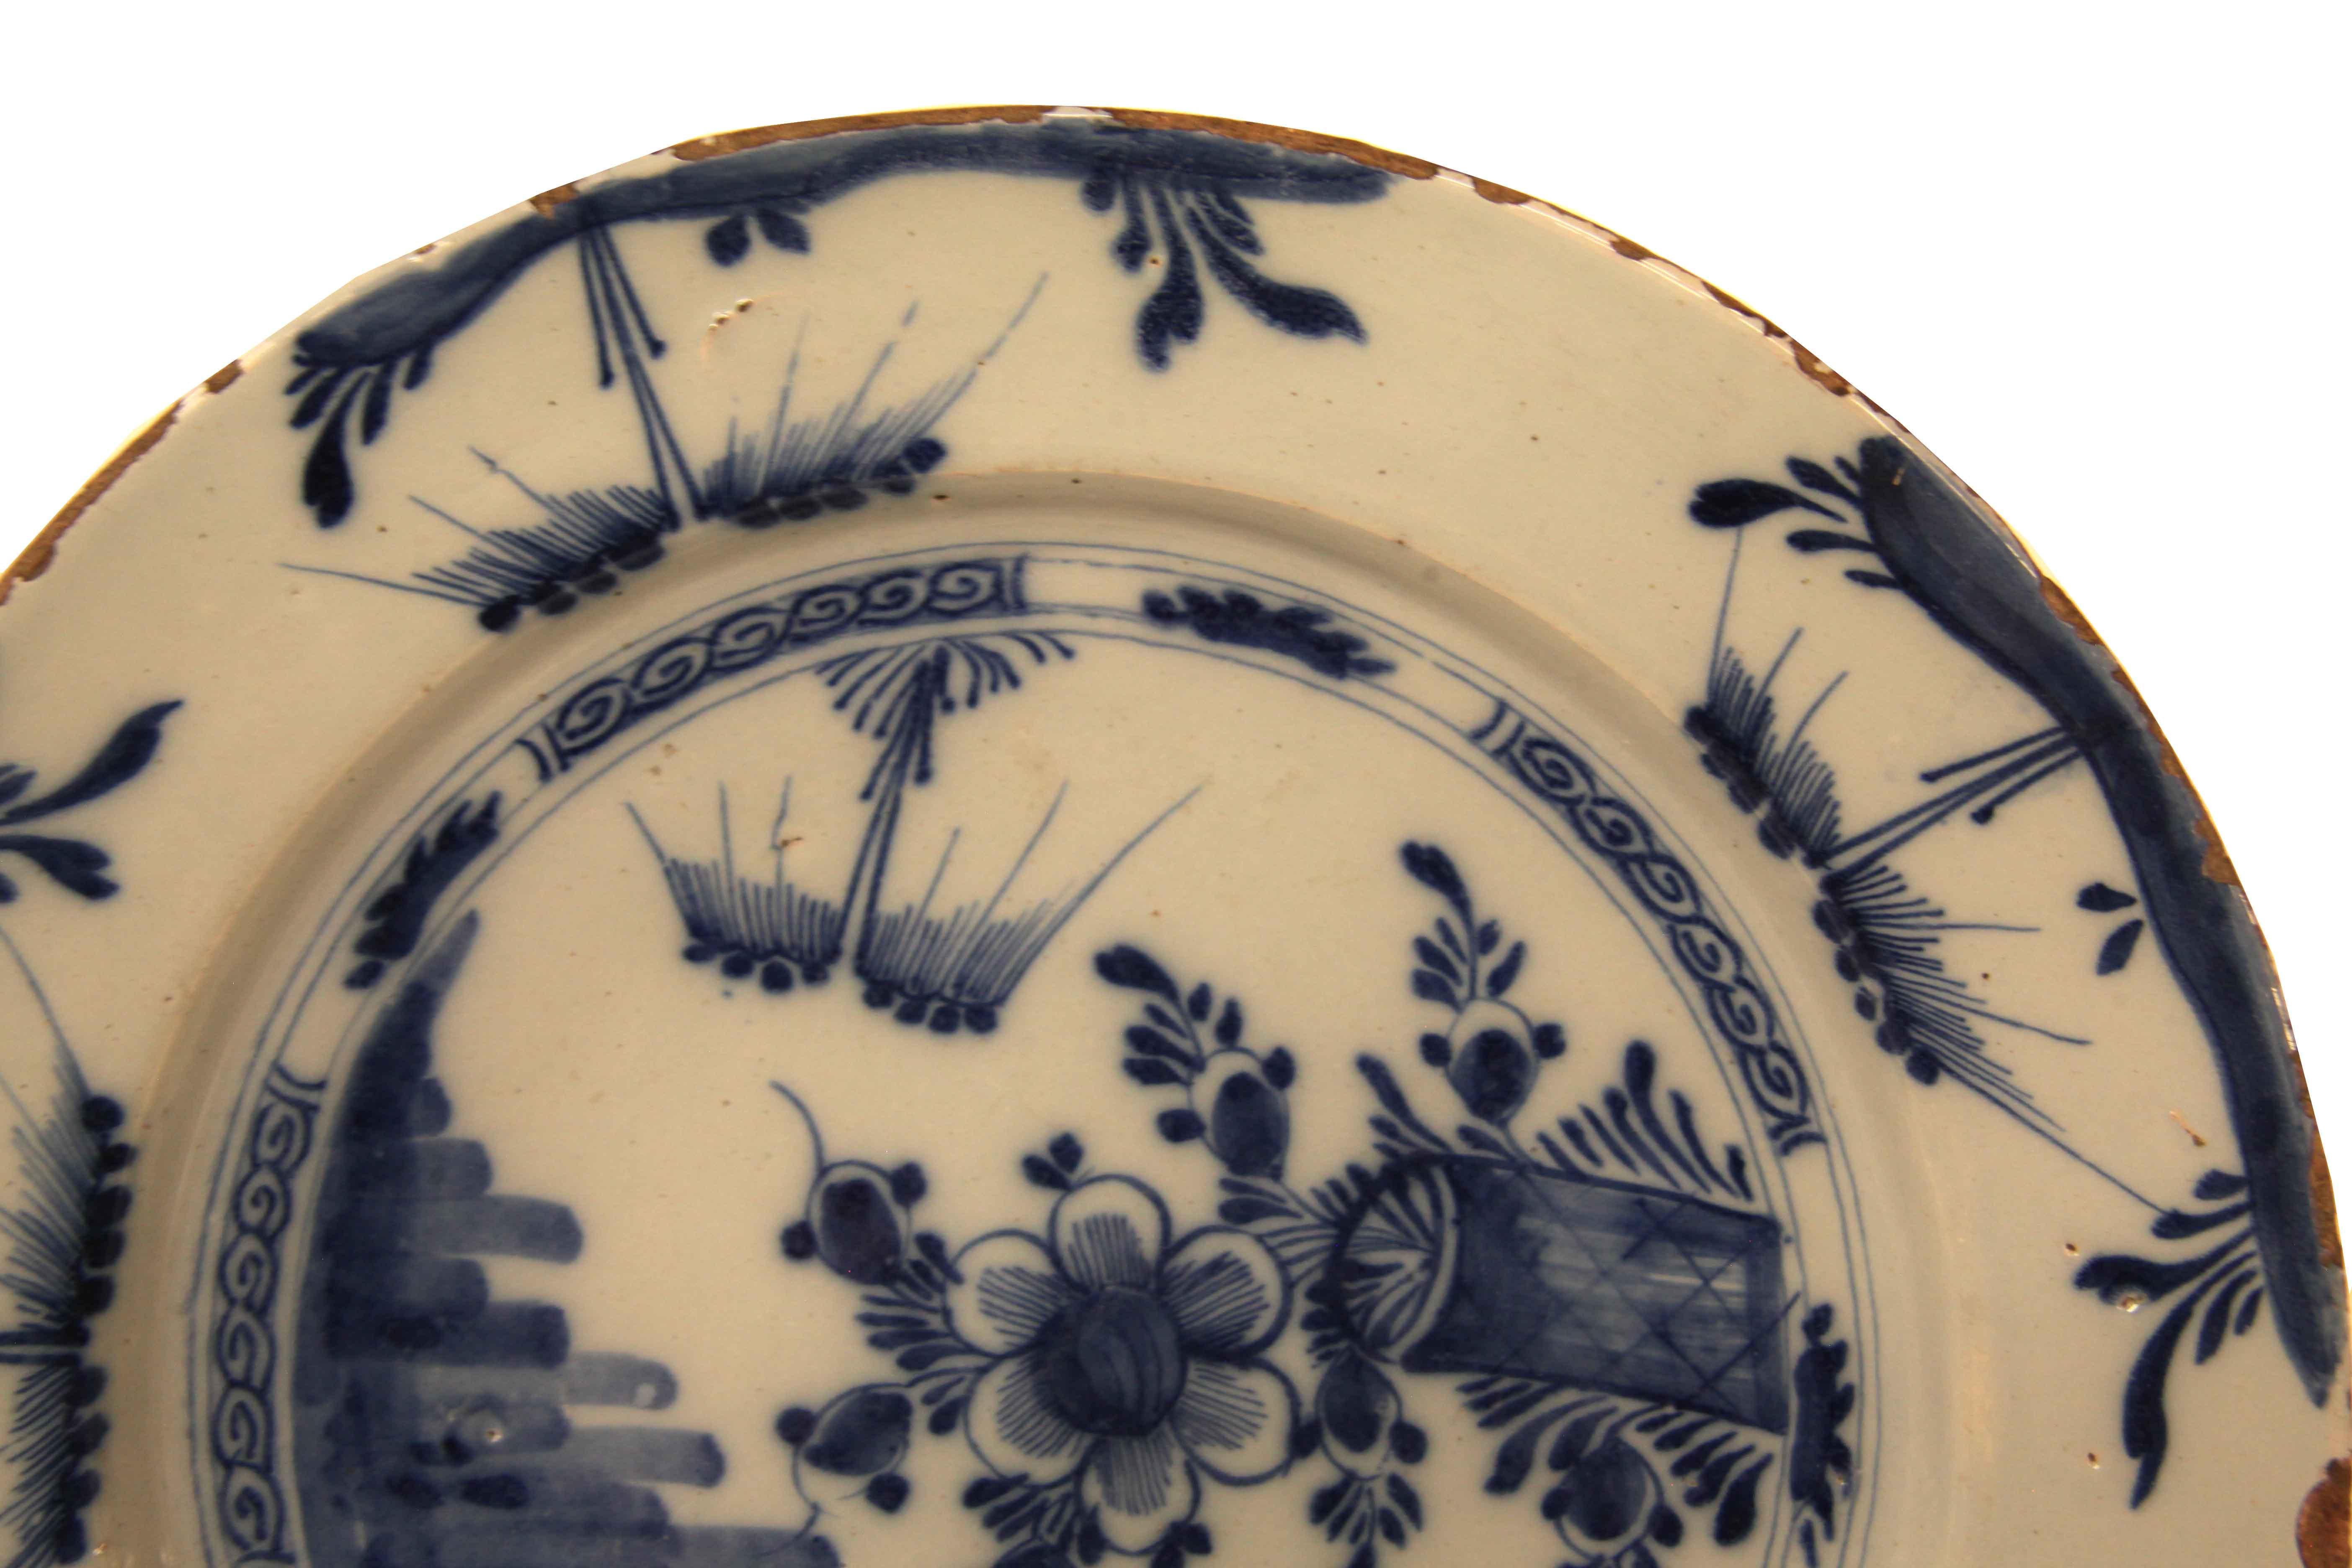 English Delft blue and white charger, the border with repeating foliate decoration, center with stylized flowers and foliate; on the back there is a blue mark in the center; the loss of glaze around the perimeter of the rim is consistent with the